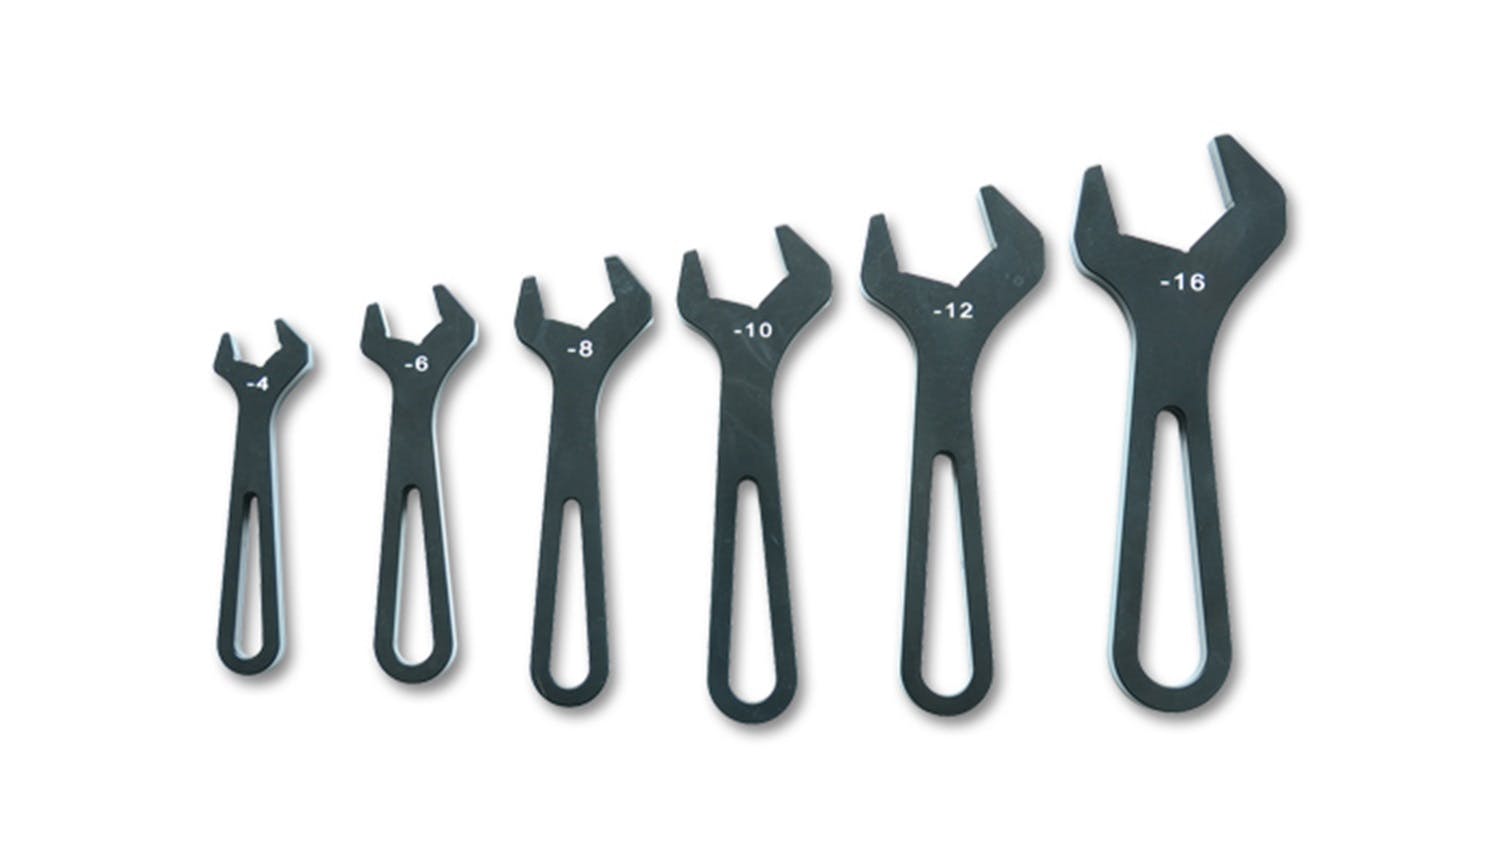 Vibrant Performance 20989 AN Wrenches, Set of six (6) - AN-4 to AN-16) - Anodized Black